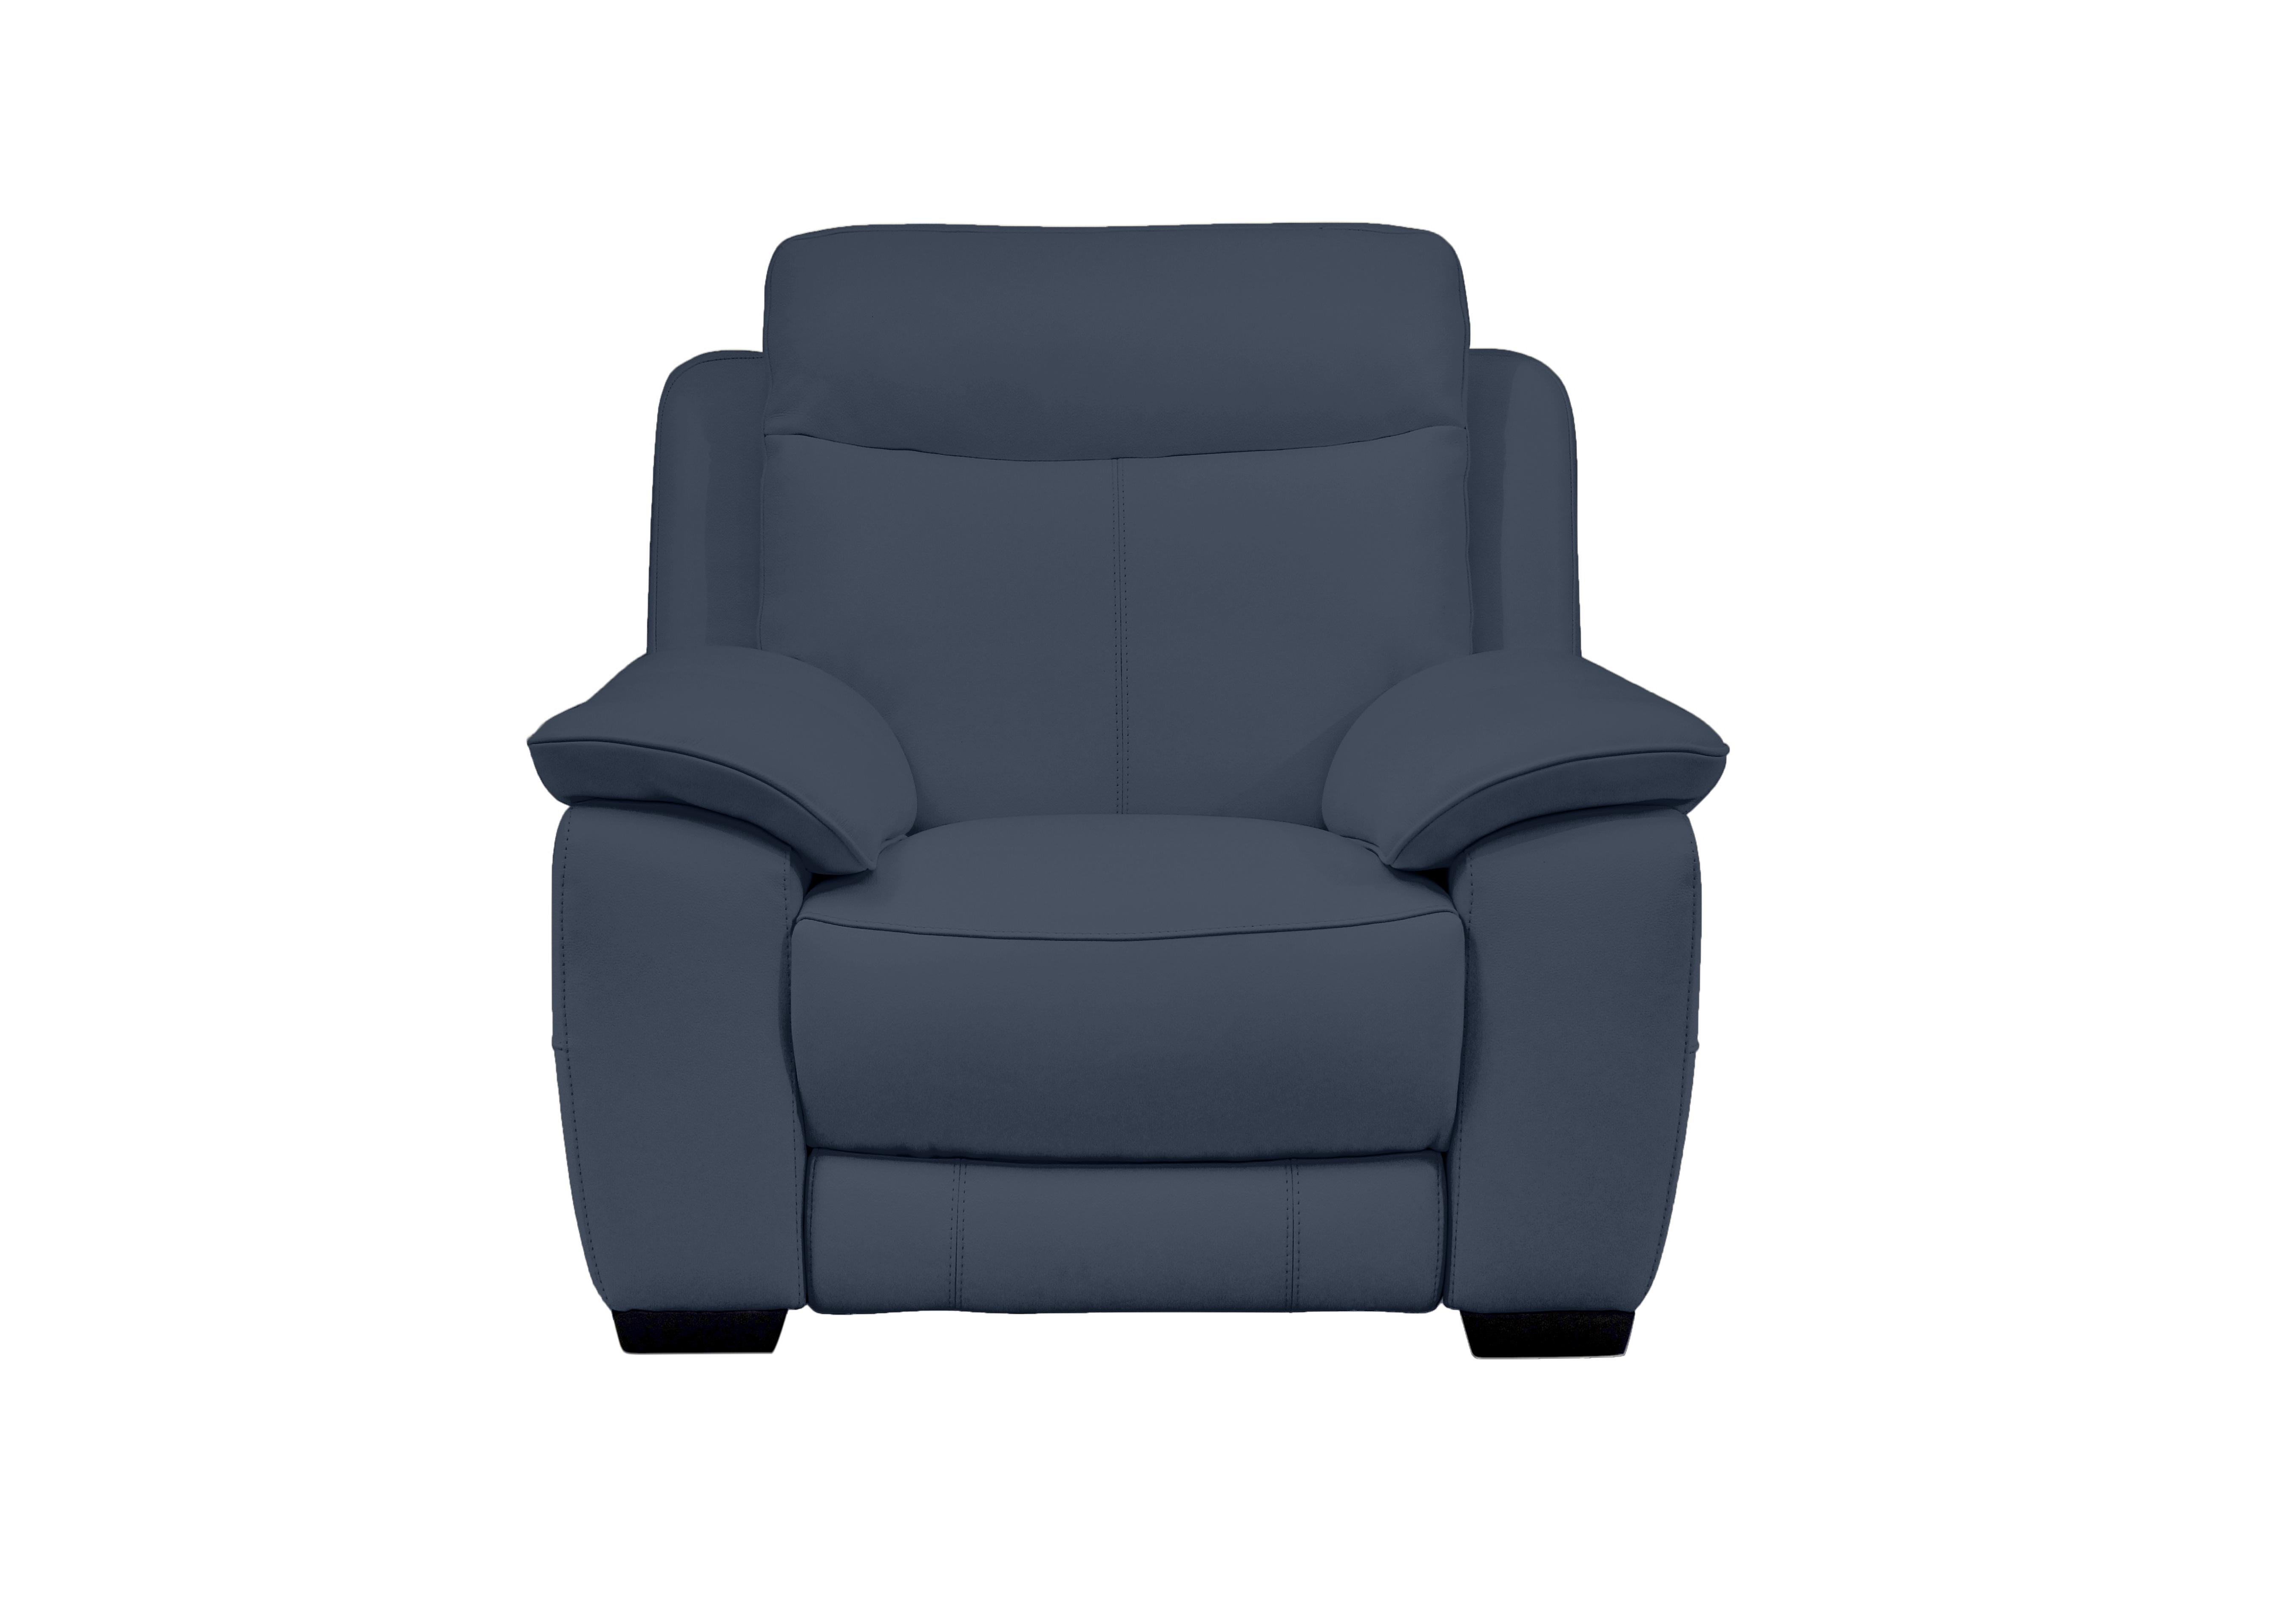 Starlight Express Leather Power Armchair with Power Headrest in Bv-313e Ocean Blue on Furniture Village